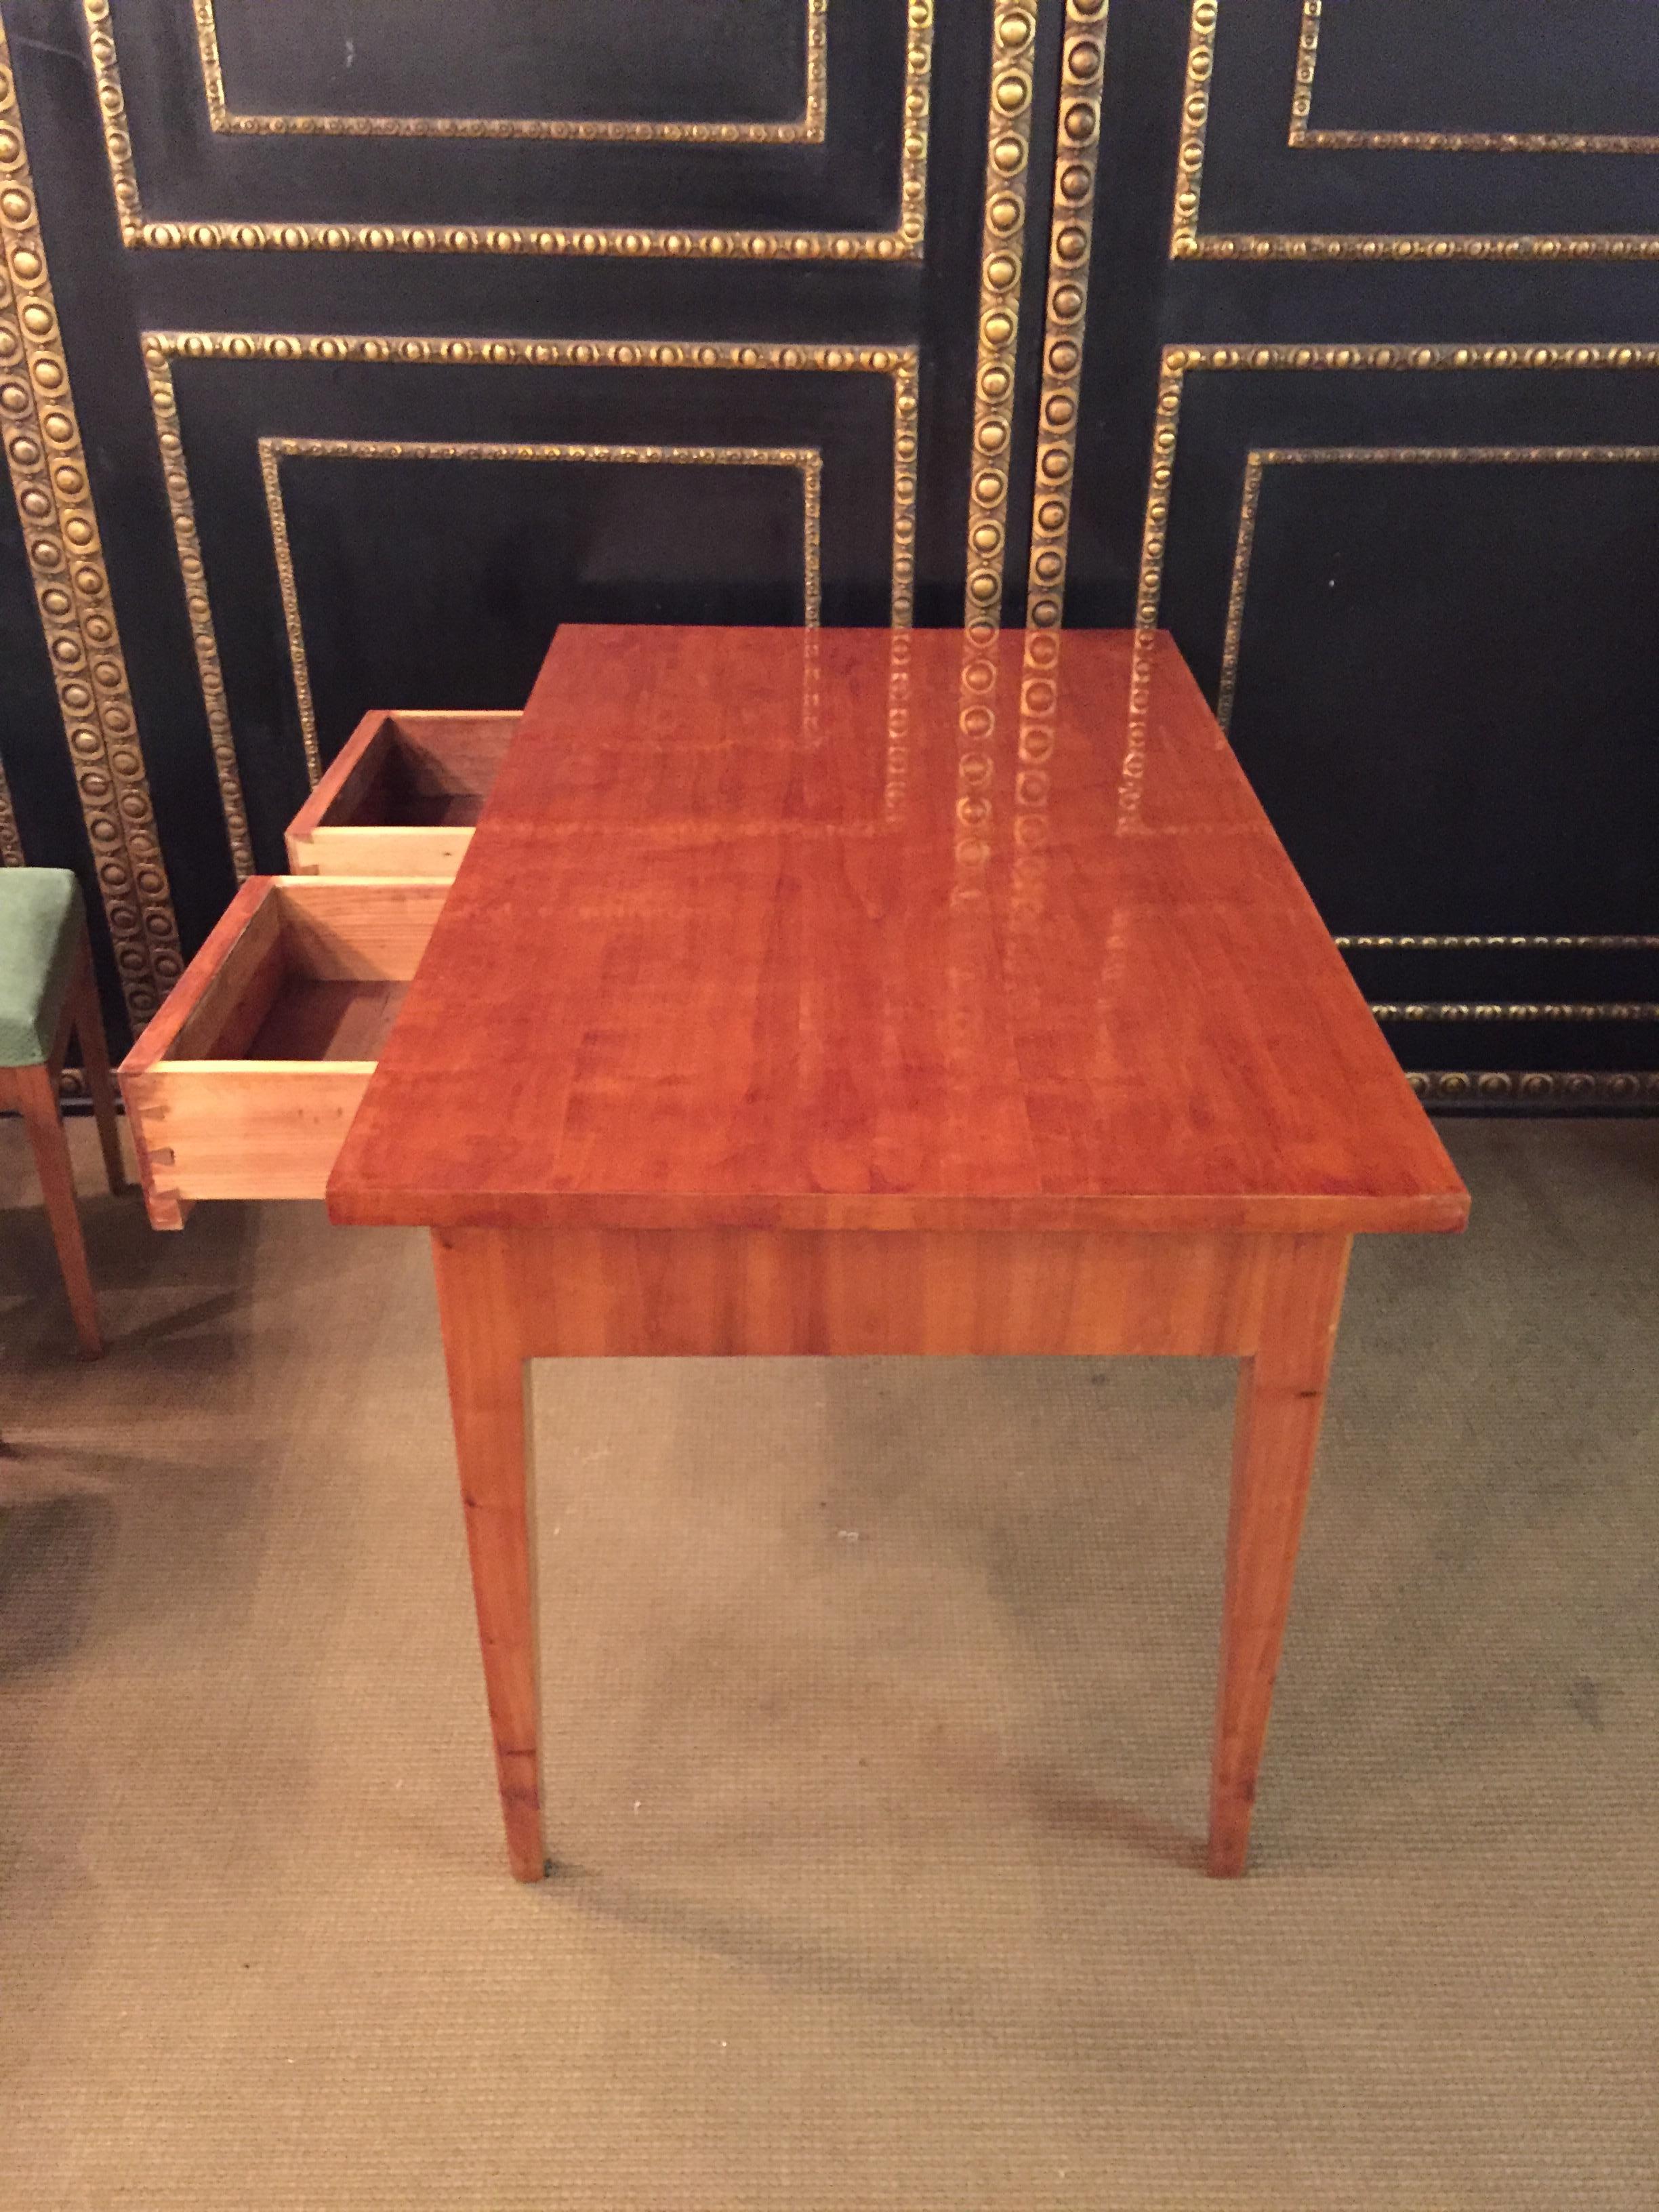 19th Century Original Biedermeier Dining Room /Dining Table with 4 Chairs Cherry 1